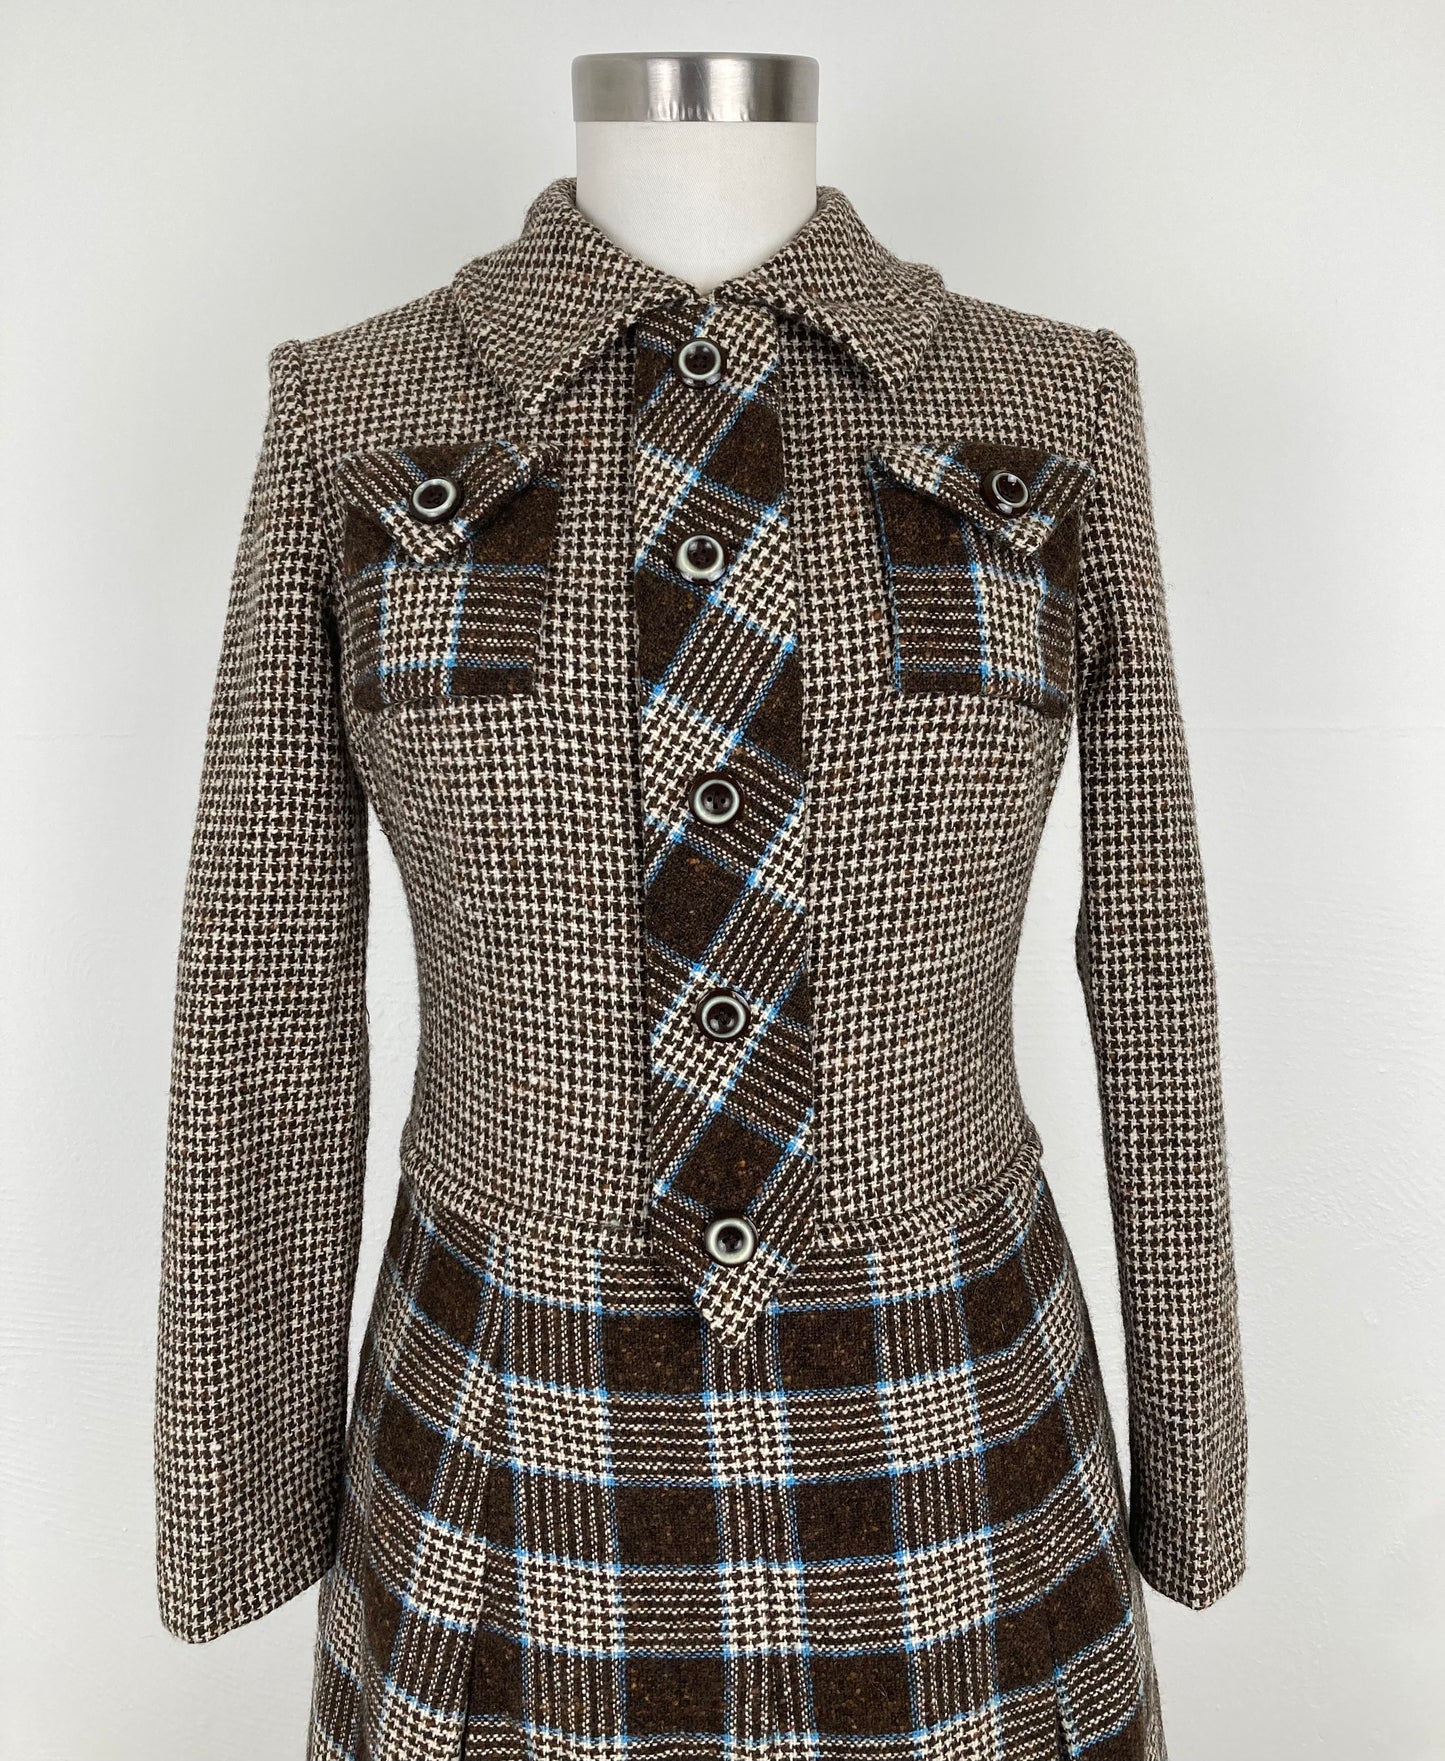 1970s Wool Houndstooth Dress with Subtle Plaid Skirt, Size S